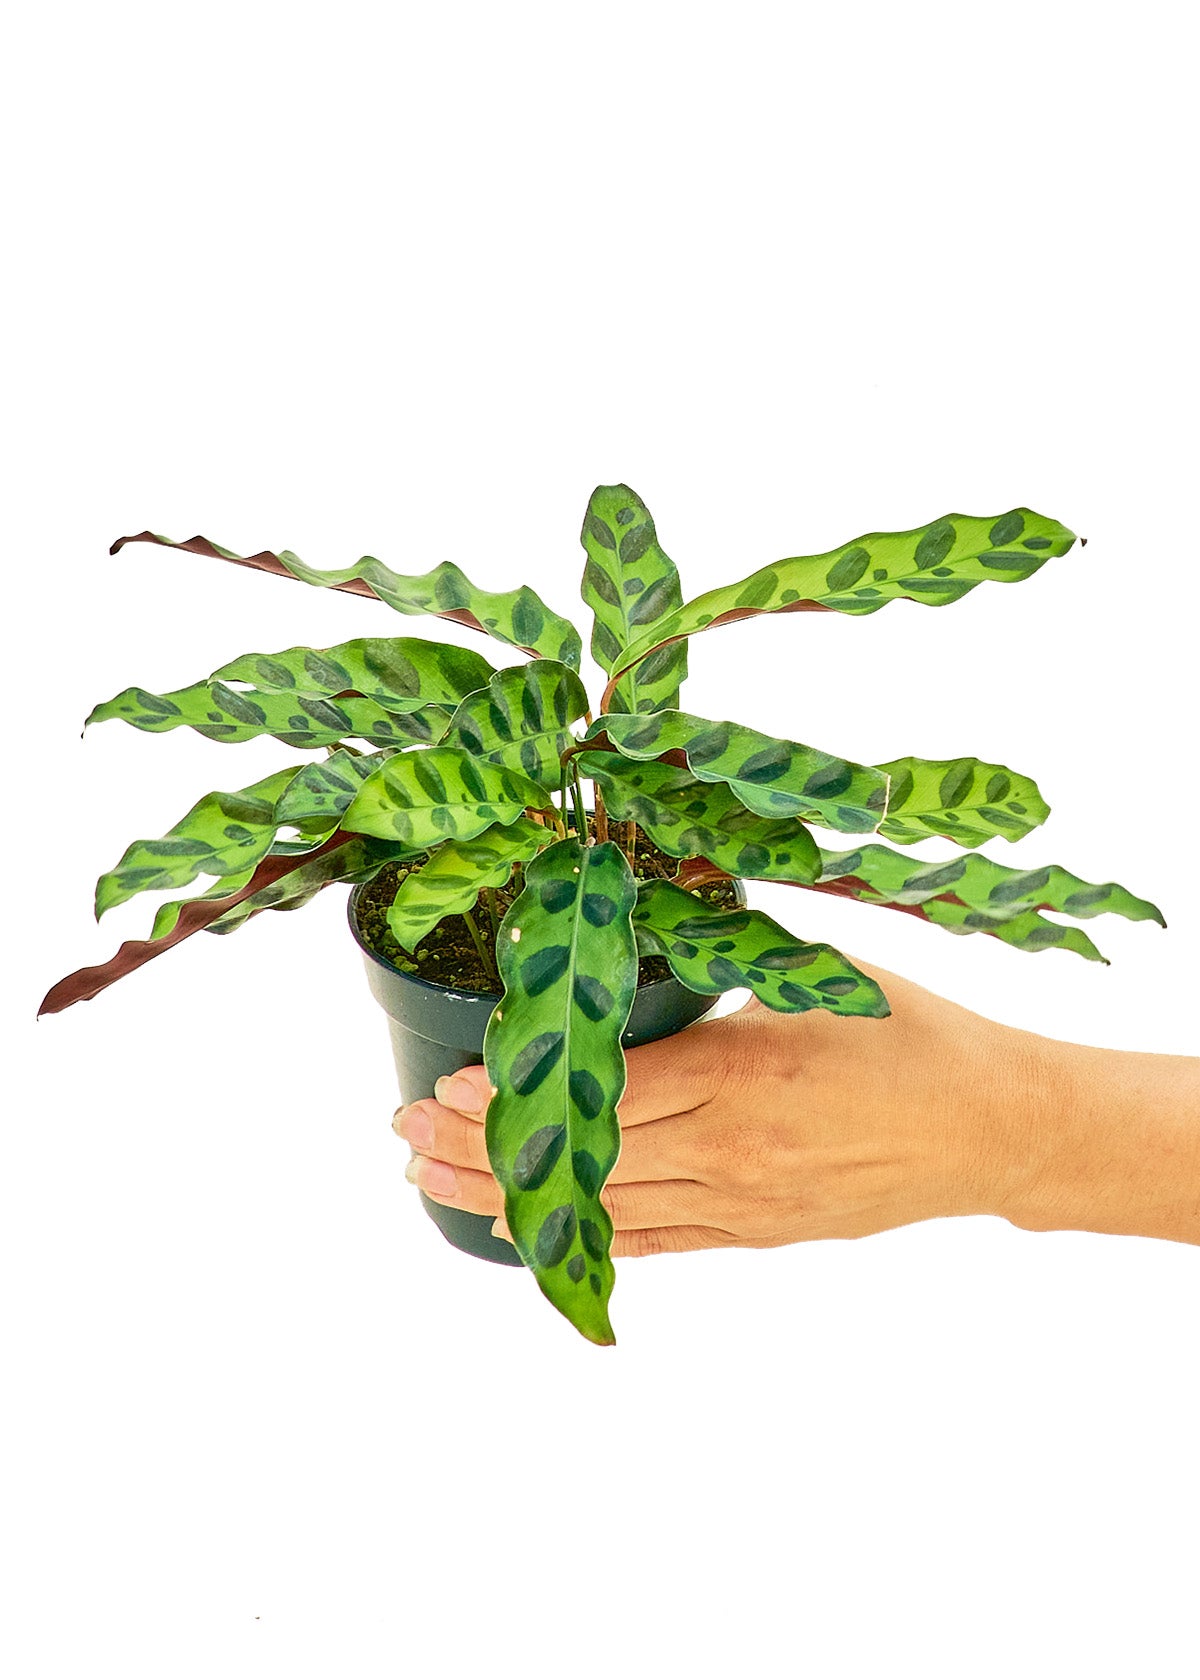 Small size Calathea Rattlesnake plant in a growers pot with a white background with a hand holding the pot showing the top view